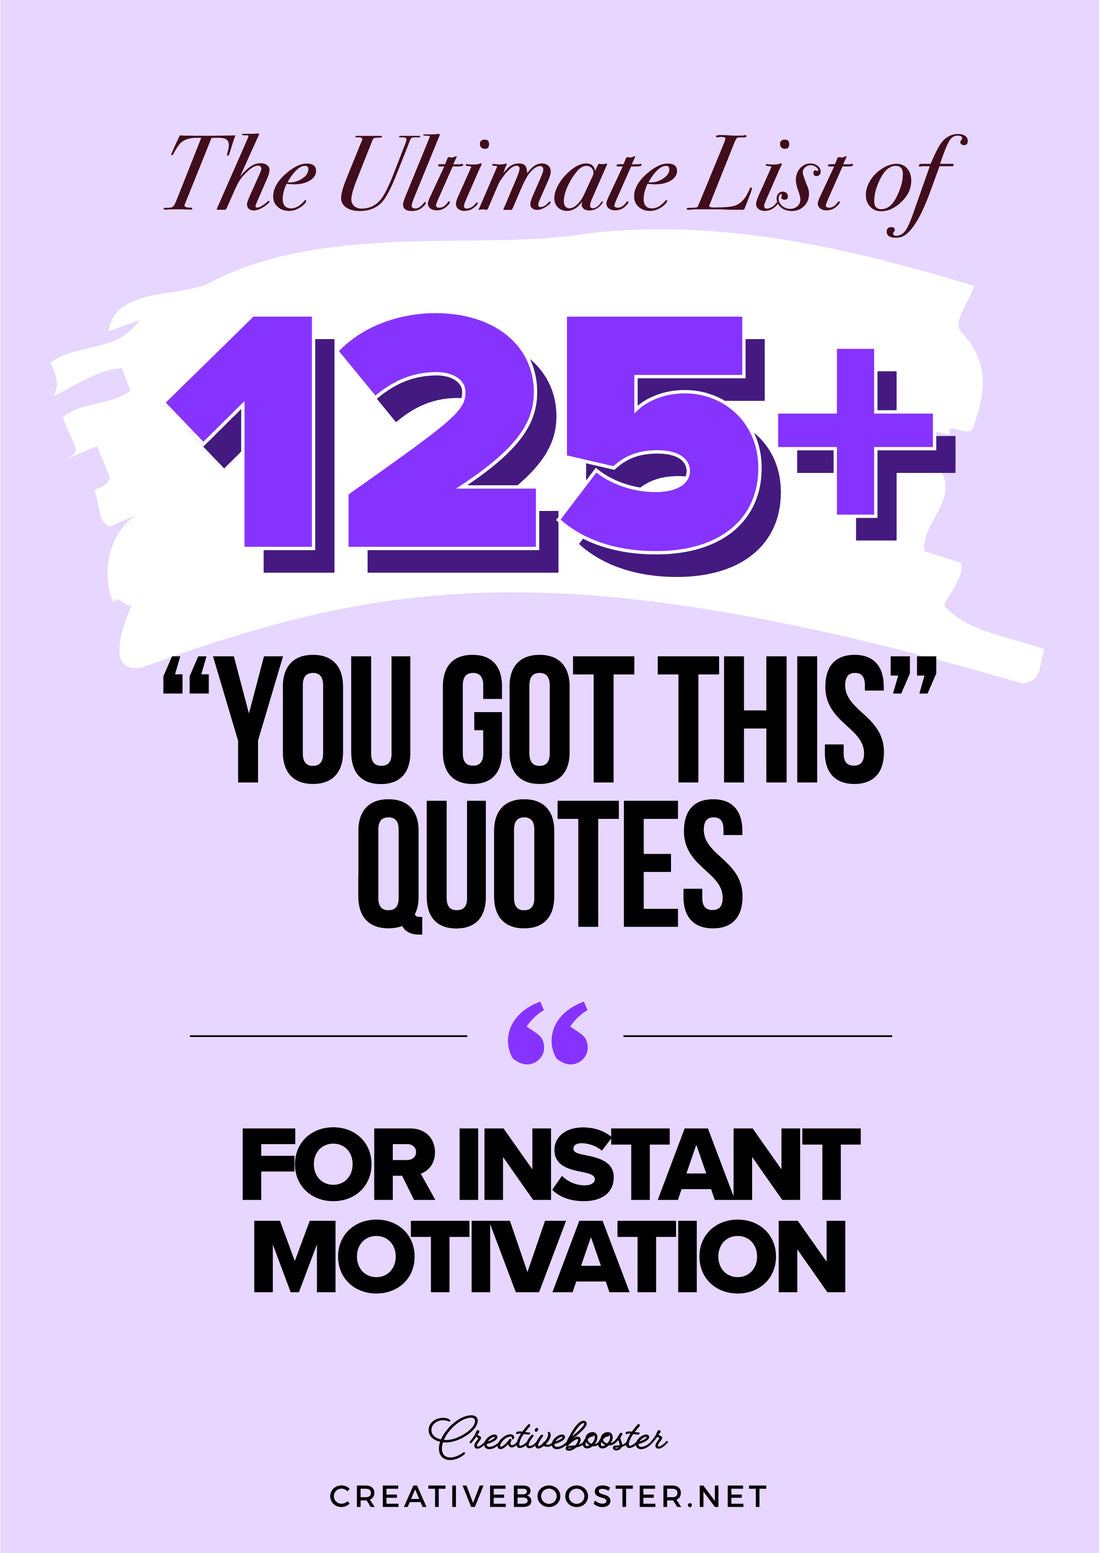 125+ You Got This Quotes for Instant Motivation (The Ultimate List)